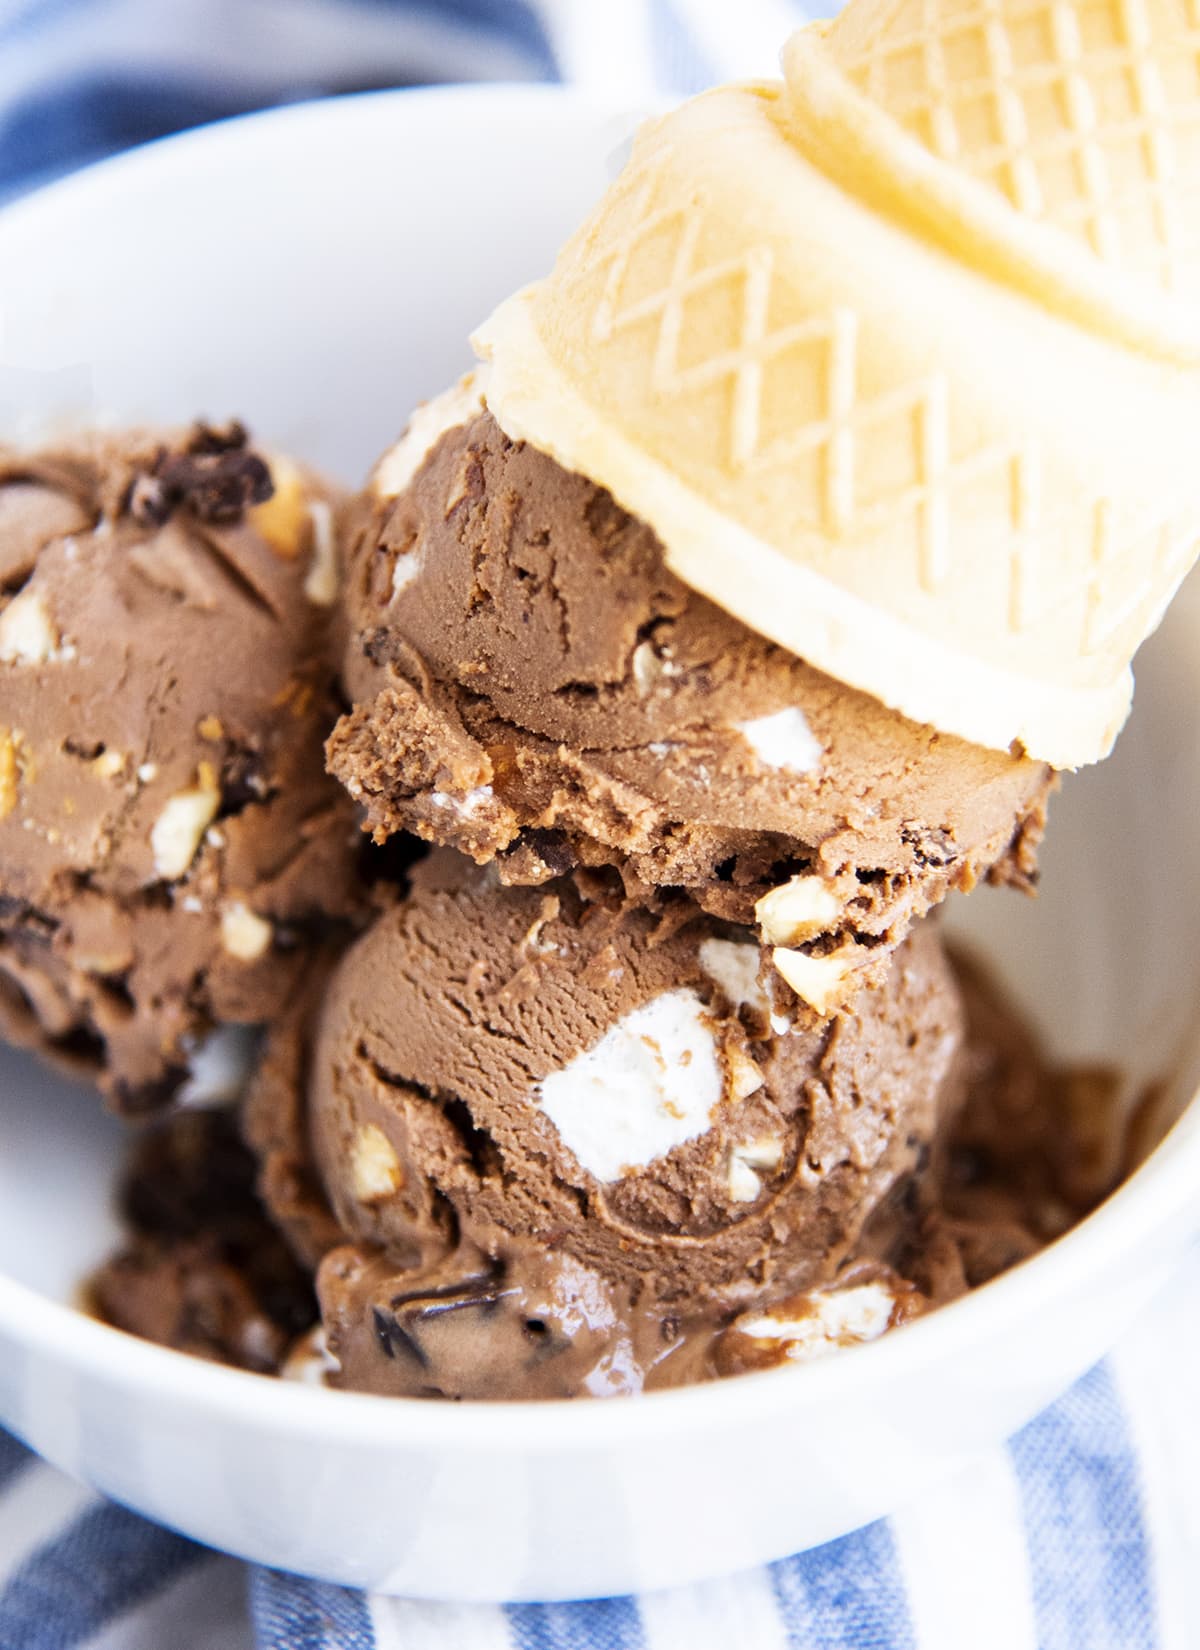 A close up of rocky road ice cream in a bowl topped with an upside down ice cream cone.